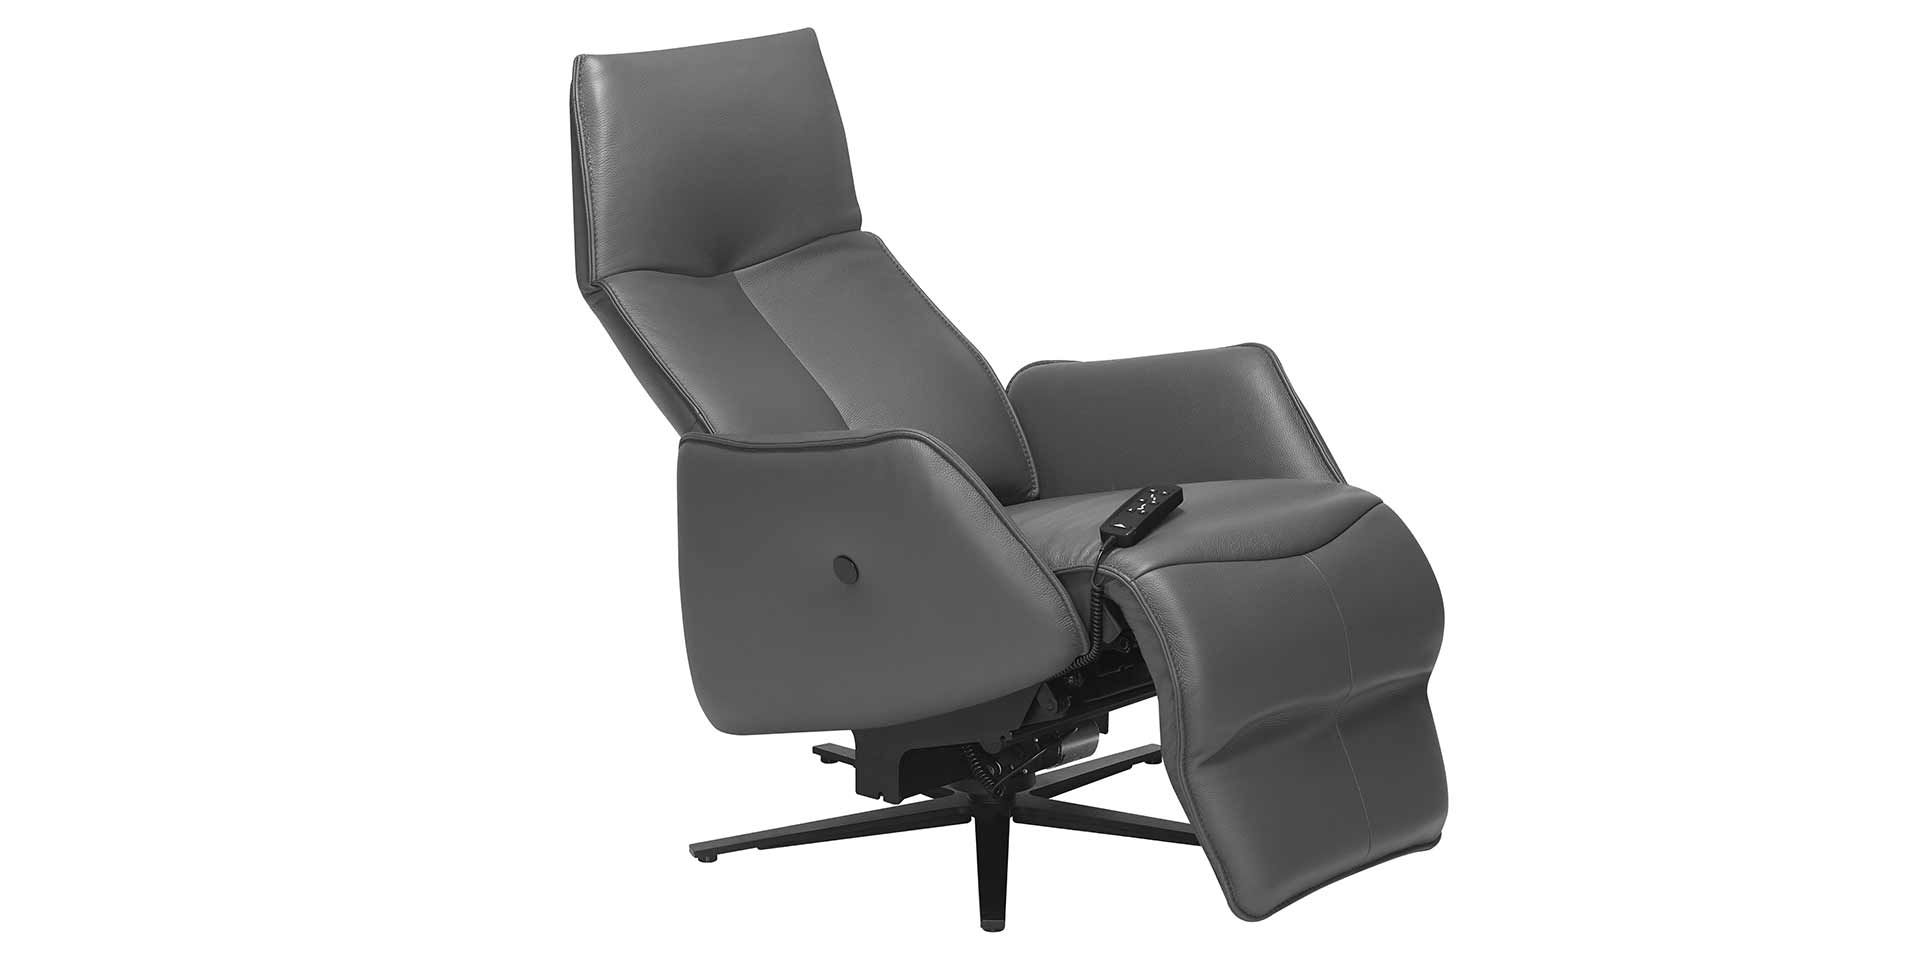 Slider Fauteuil relaxation 7917 (image 2)